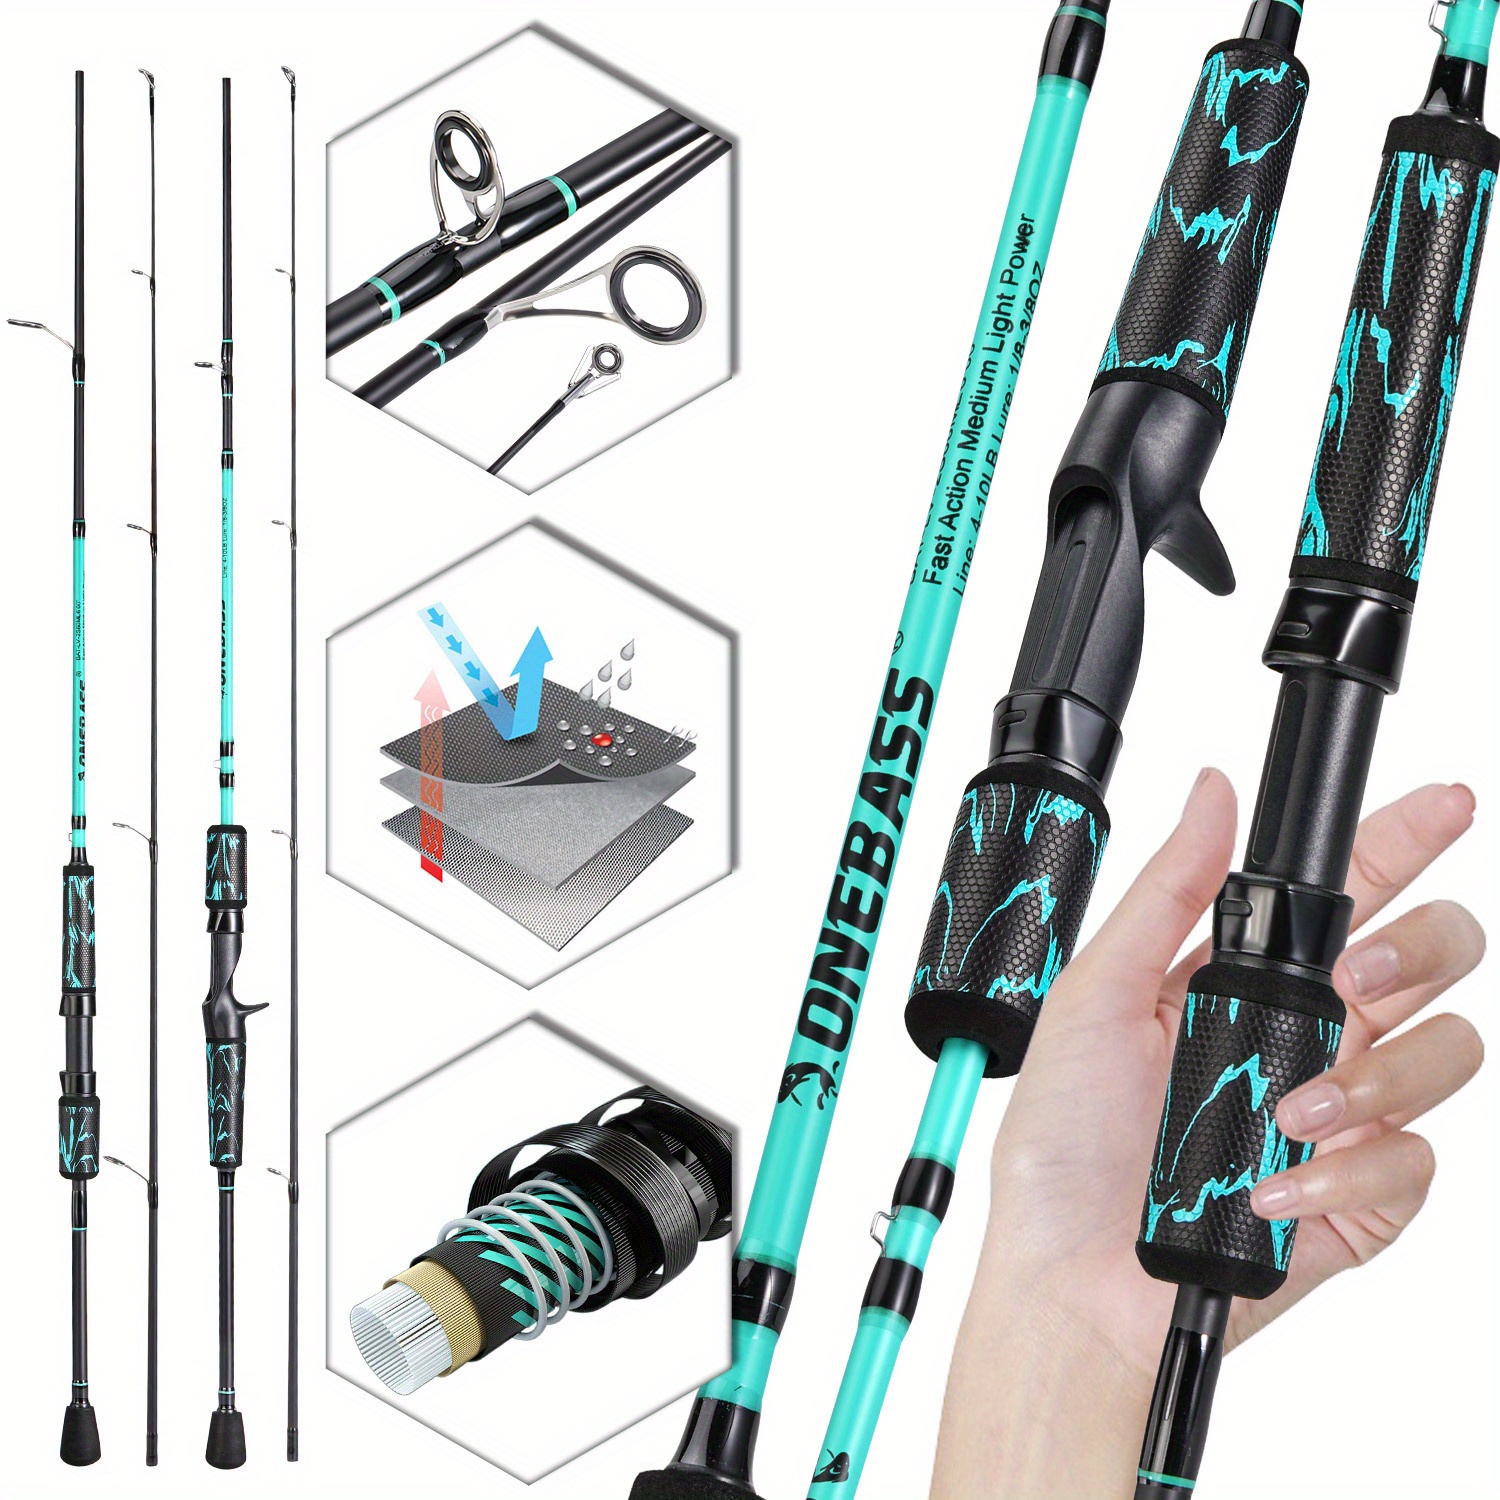 Spinning Fishing Rod,Durable Lightweight Sensitive Fishing Rod,Carbon Fiber  Spinning & Casting Rod,Lightweight Fishing Pole Designed for Bass, Trout